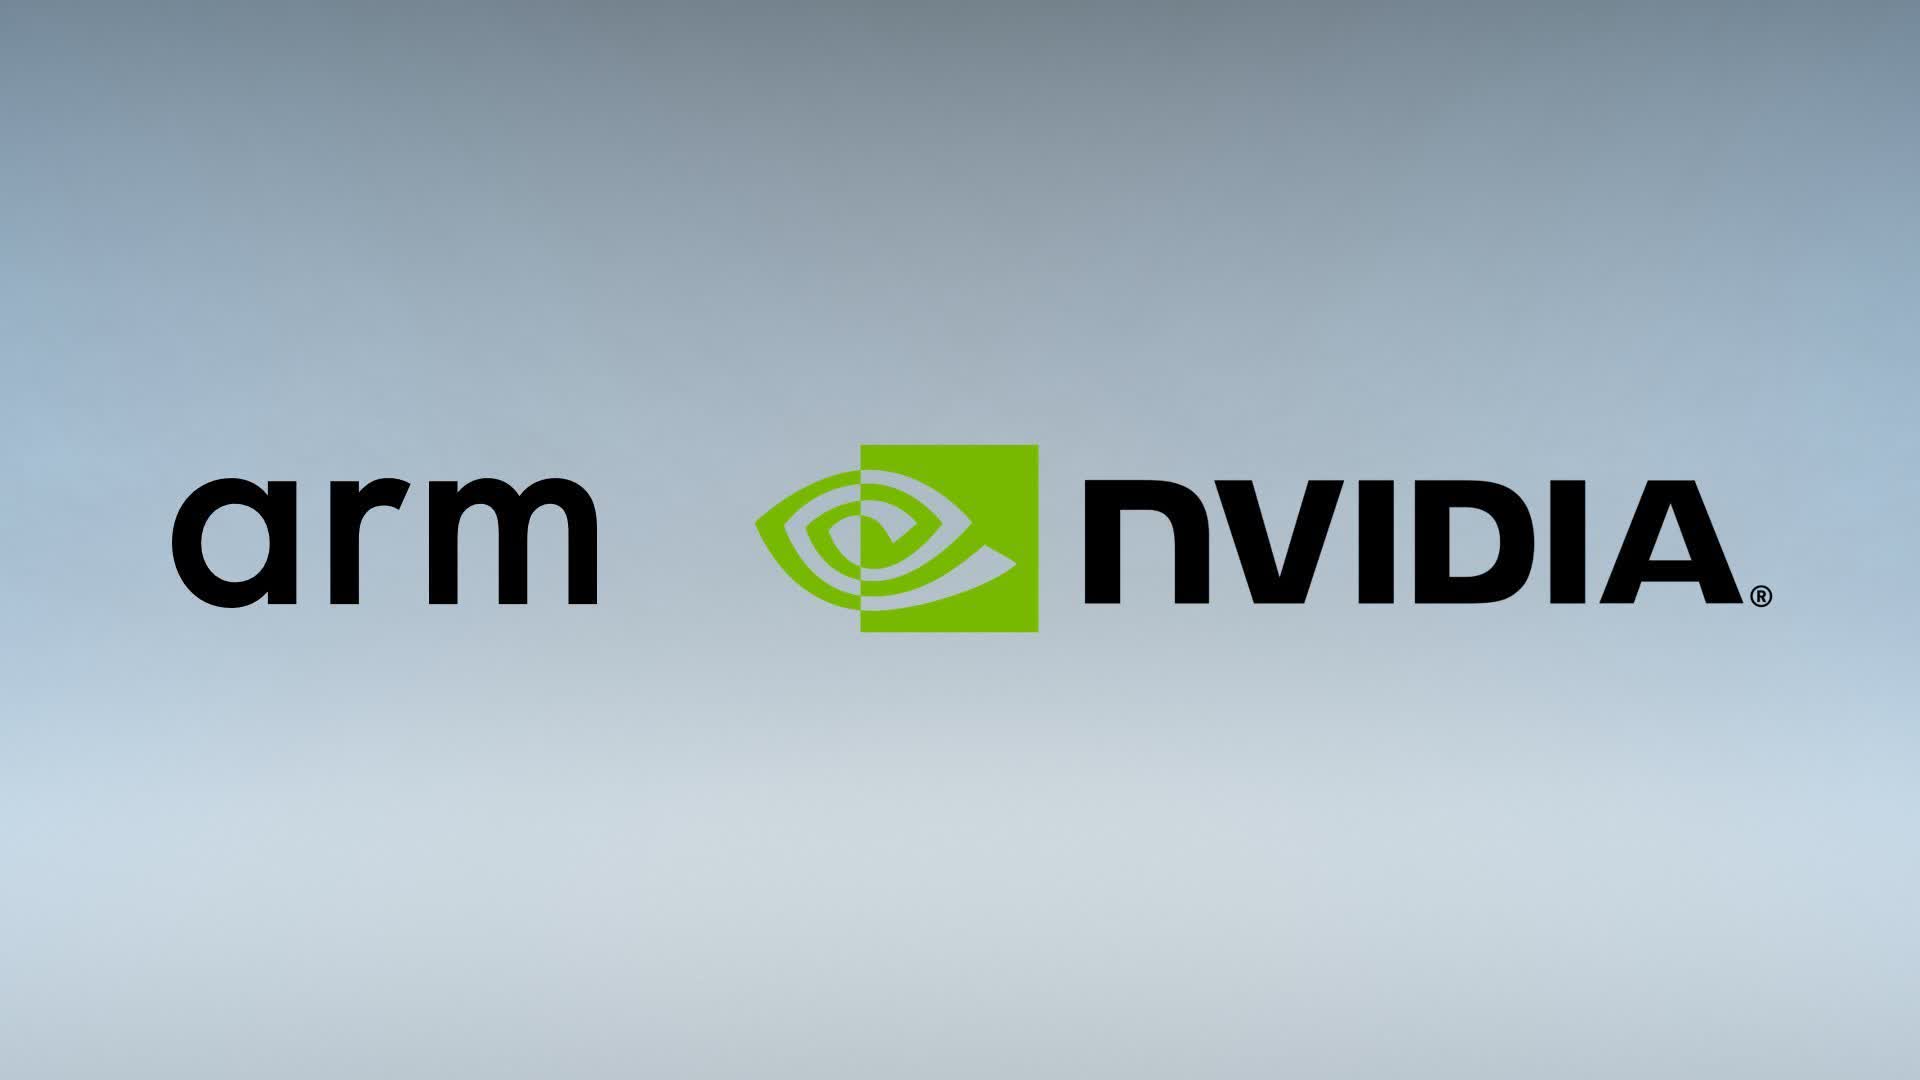 The $40 billion Nvidia acquisition of Arm has collapsed